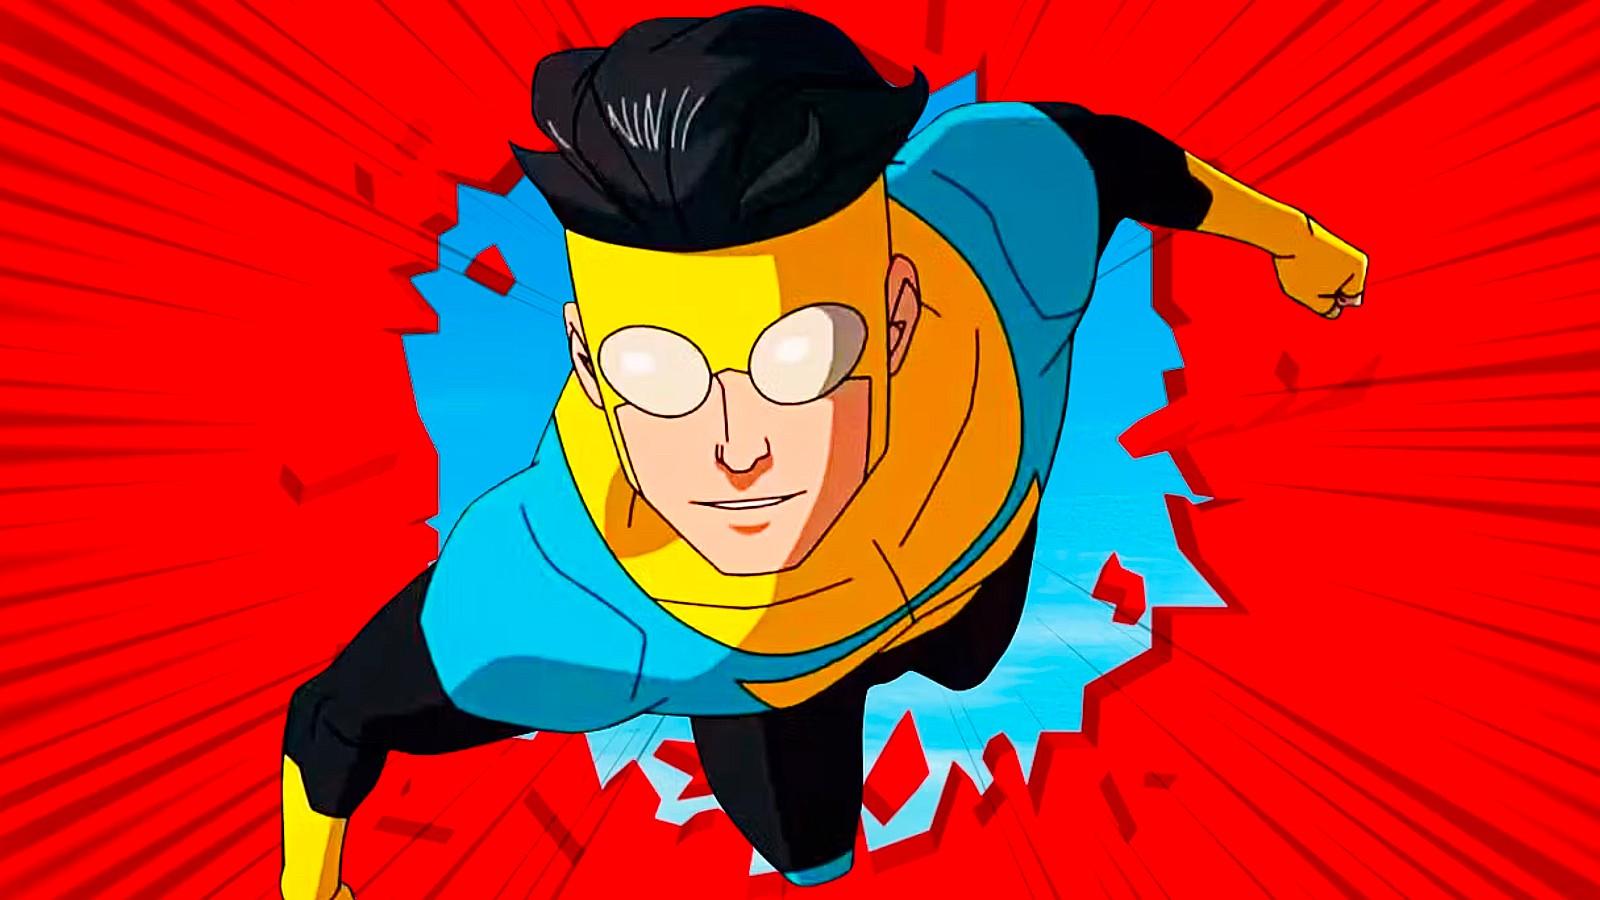 Invincible Season 2: Release Window, Cast and Everything We Know So Far